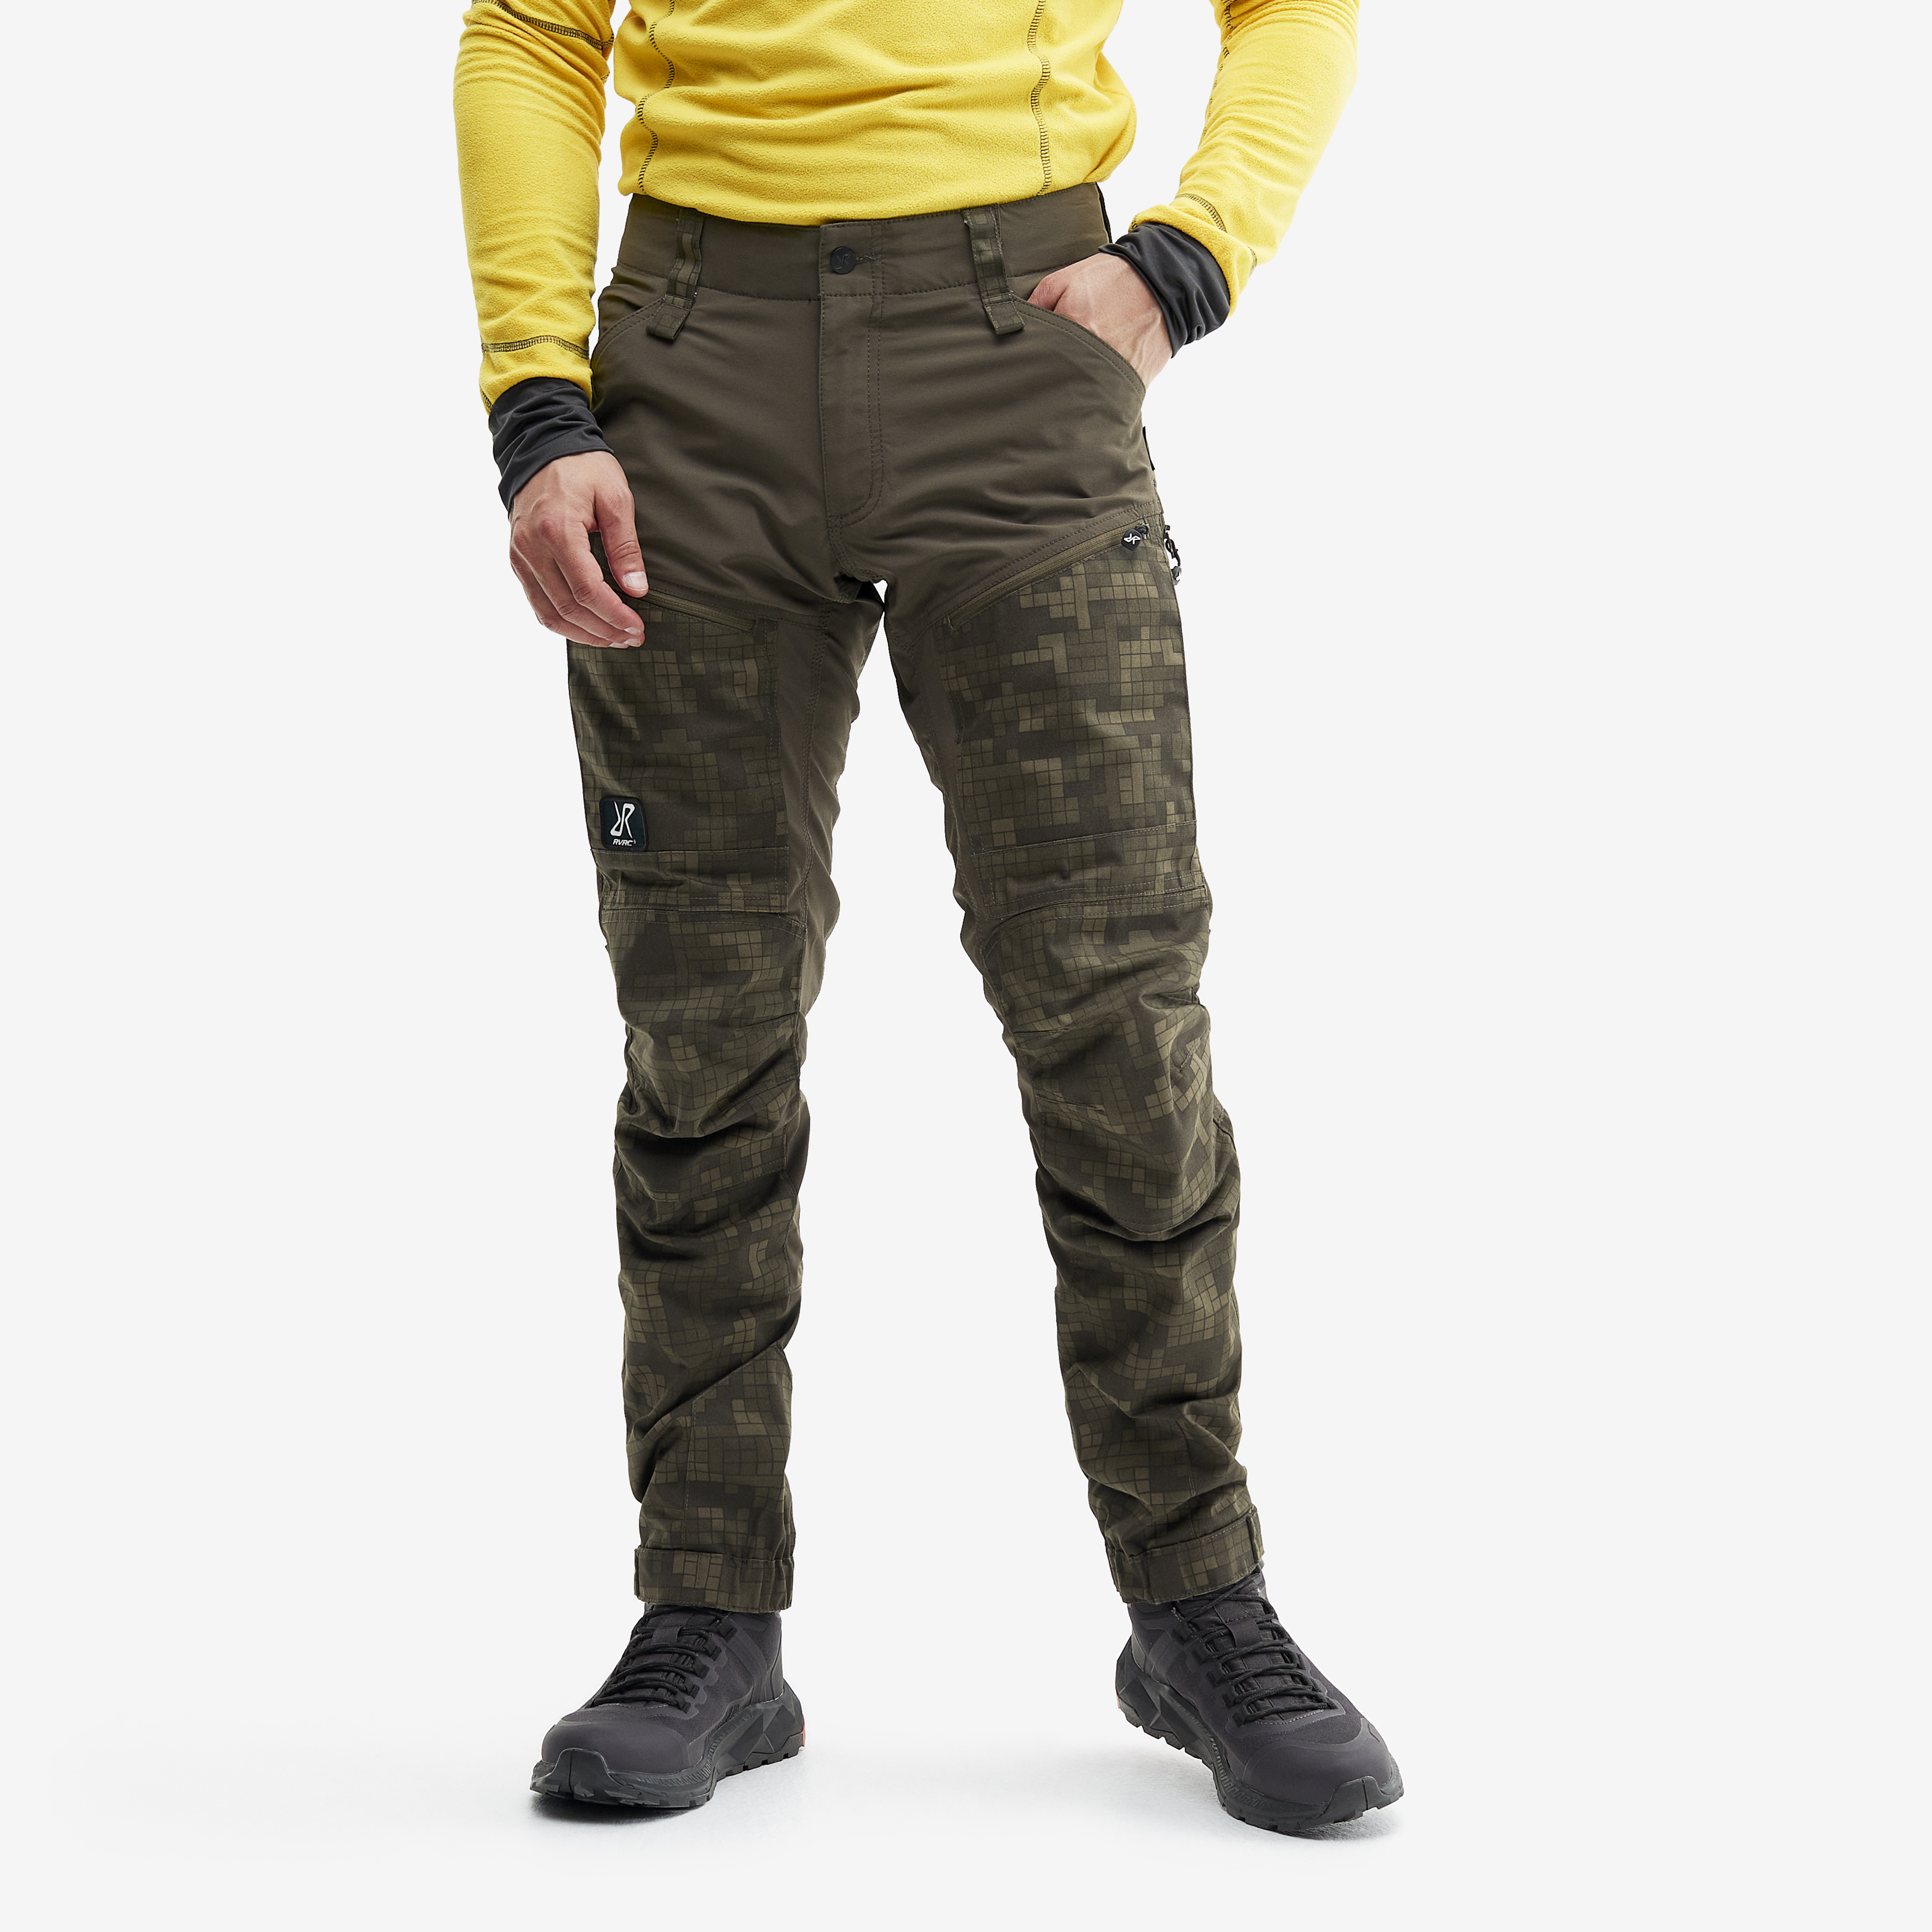 RVRC GP Pro hiking trousers for men in brown